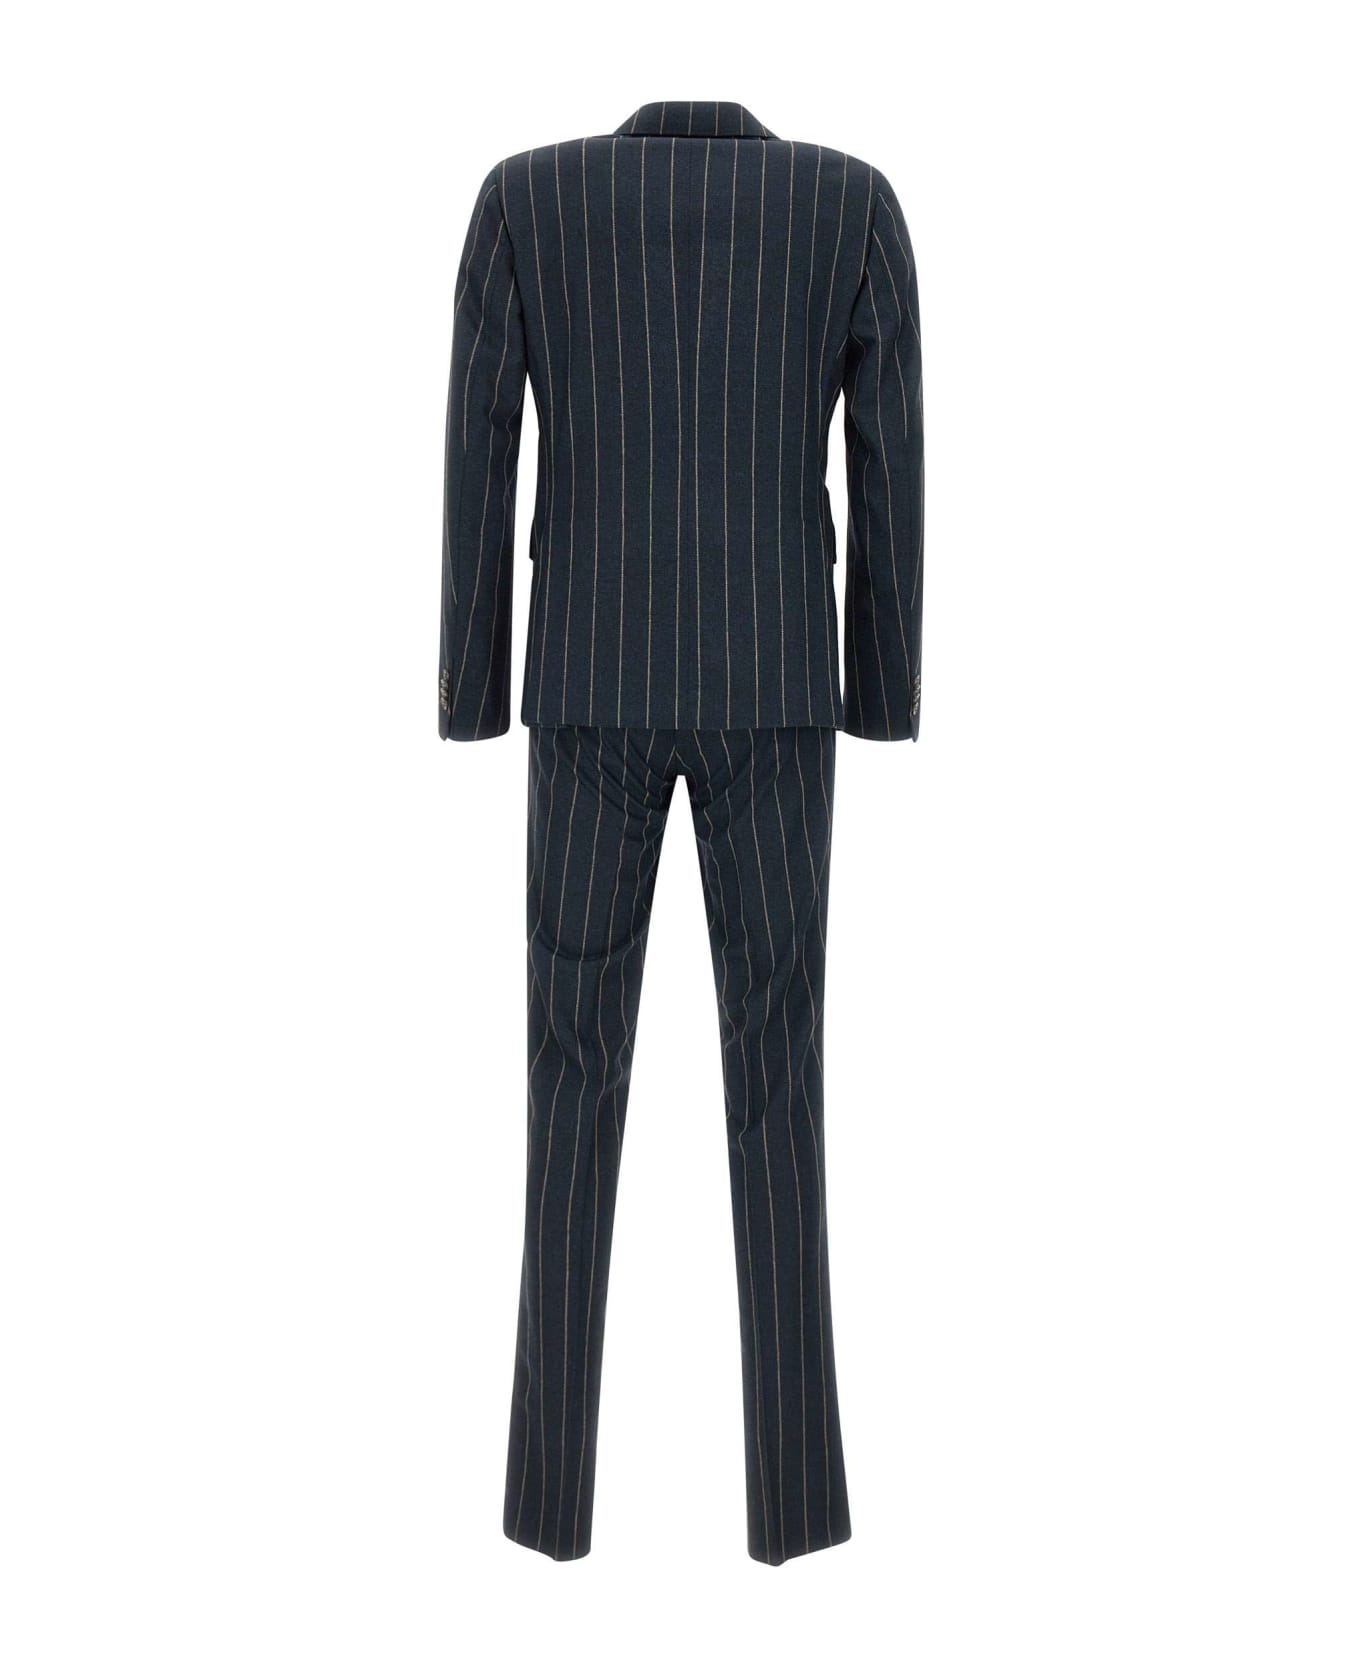 Brian Dales Wool And Cashmere Suit - BLACK スーツ